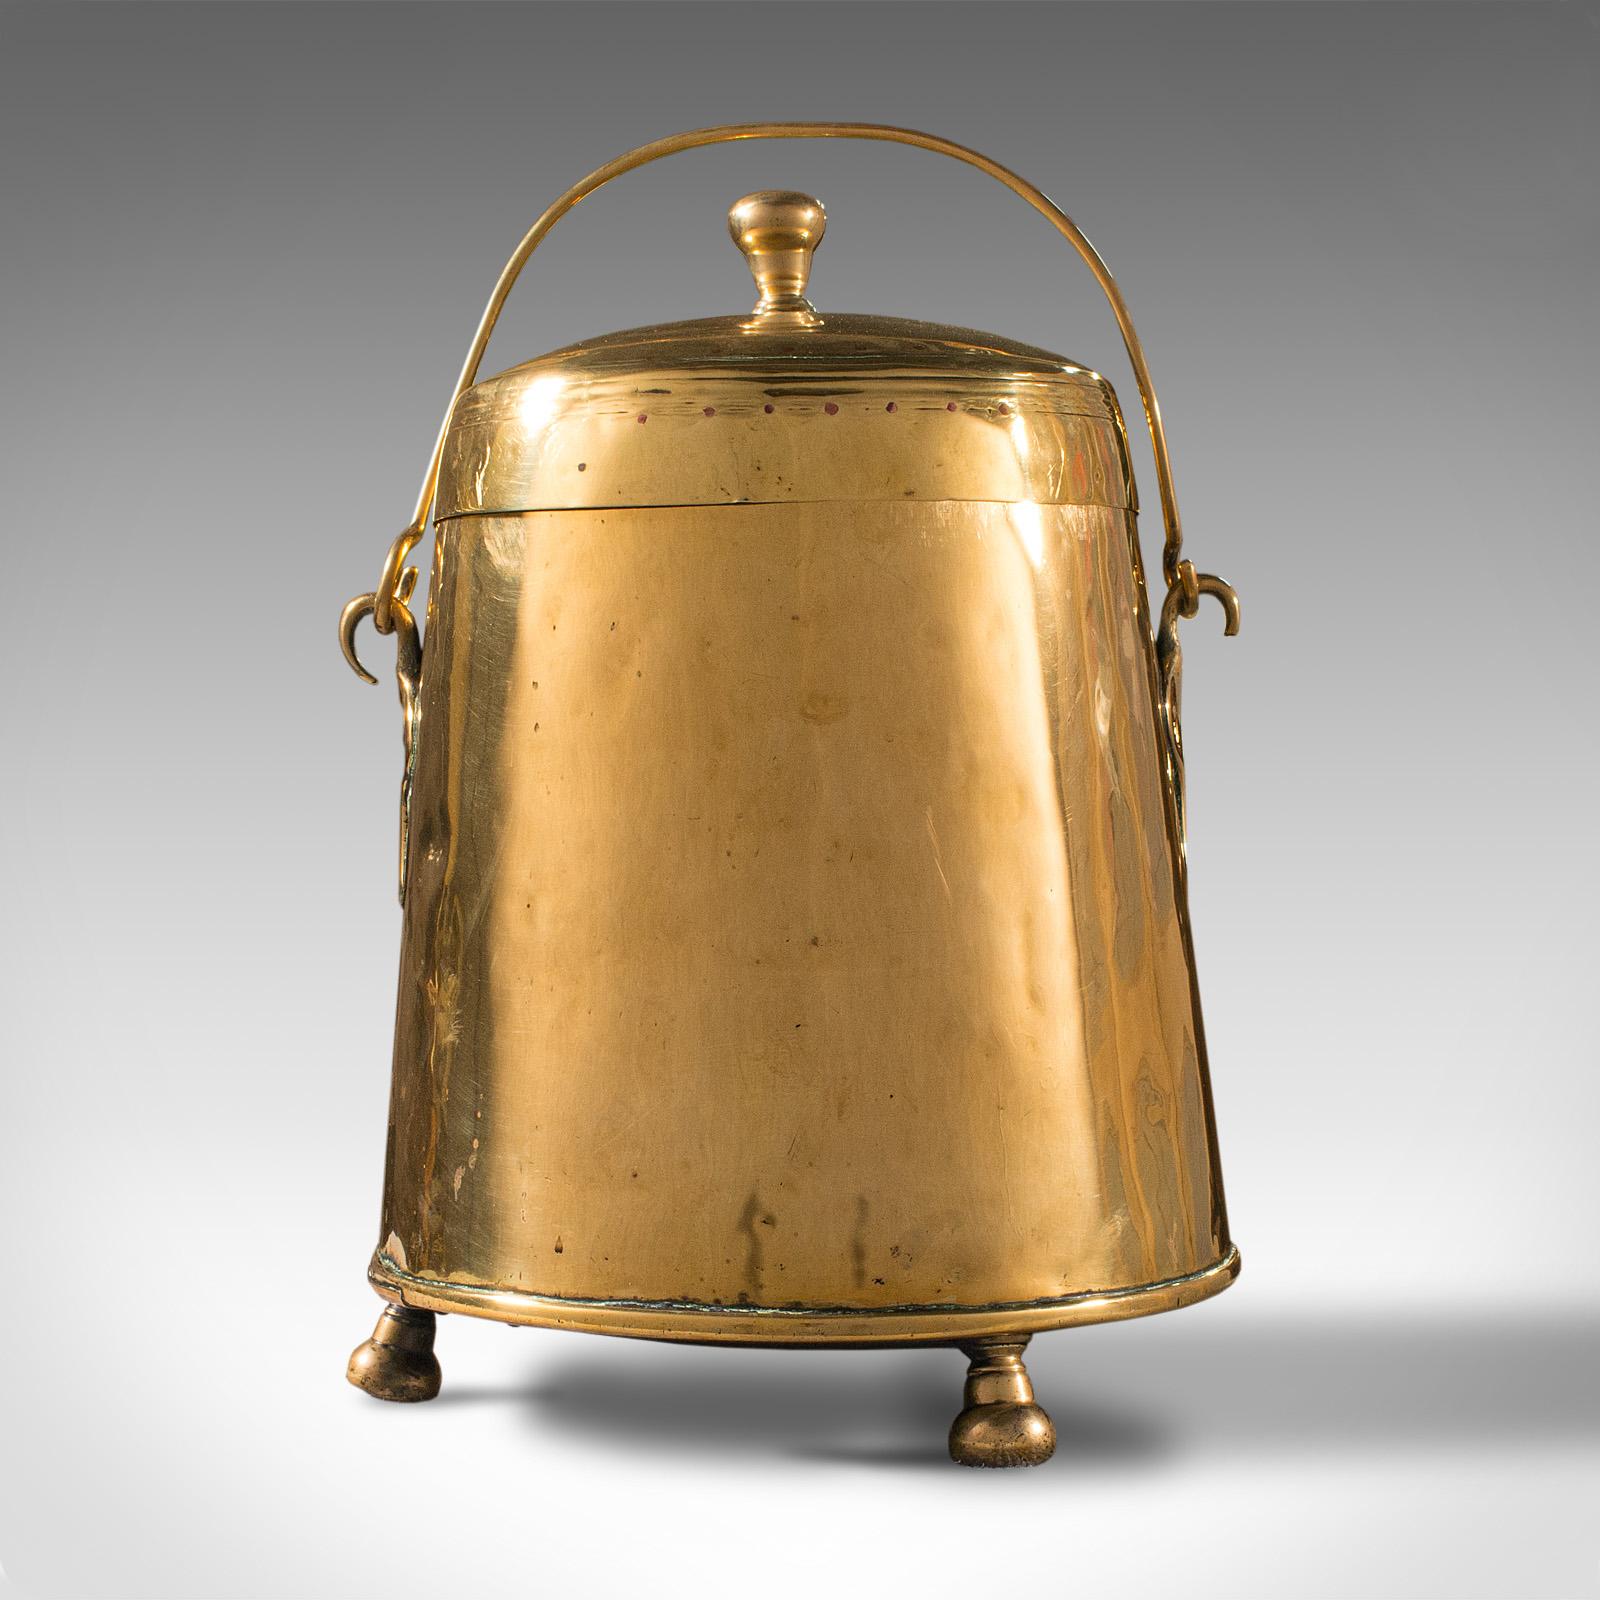 This is an antique fireside store. An English, brass coal bucket with cover, dating to the Regency period, circa 1820.

Pleasingly polished fireside keep from the Regency period
Displays a desirable aged patina with signs of gentle